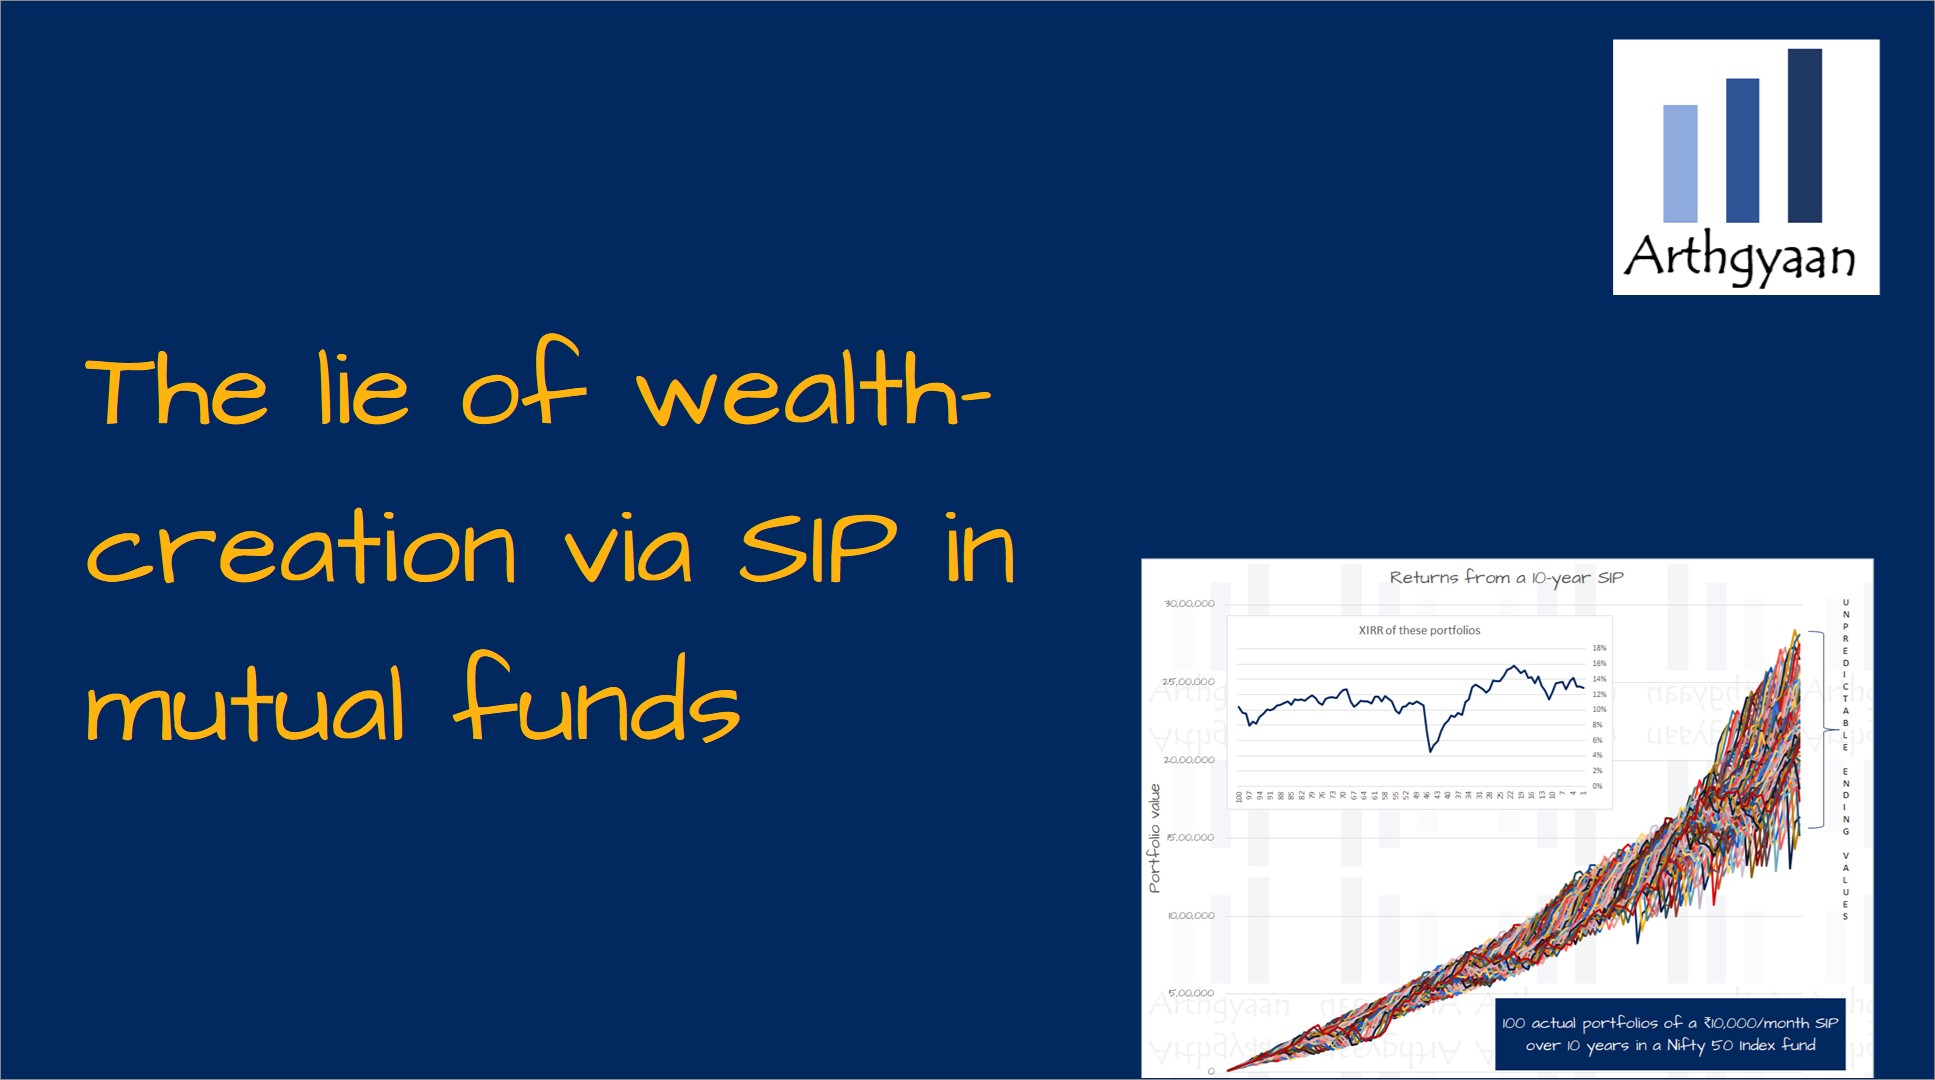 The lie of wealth-creation via SIP in mutual funds